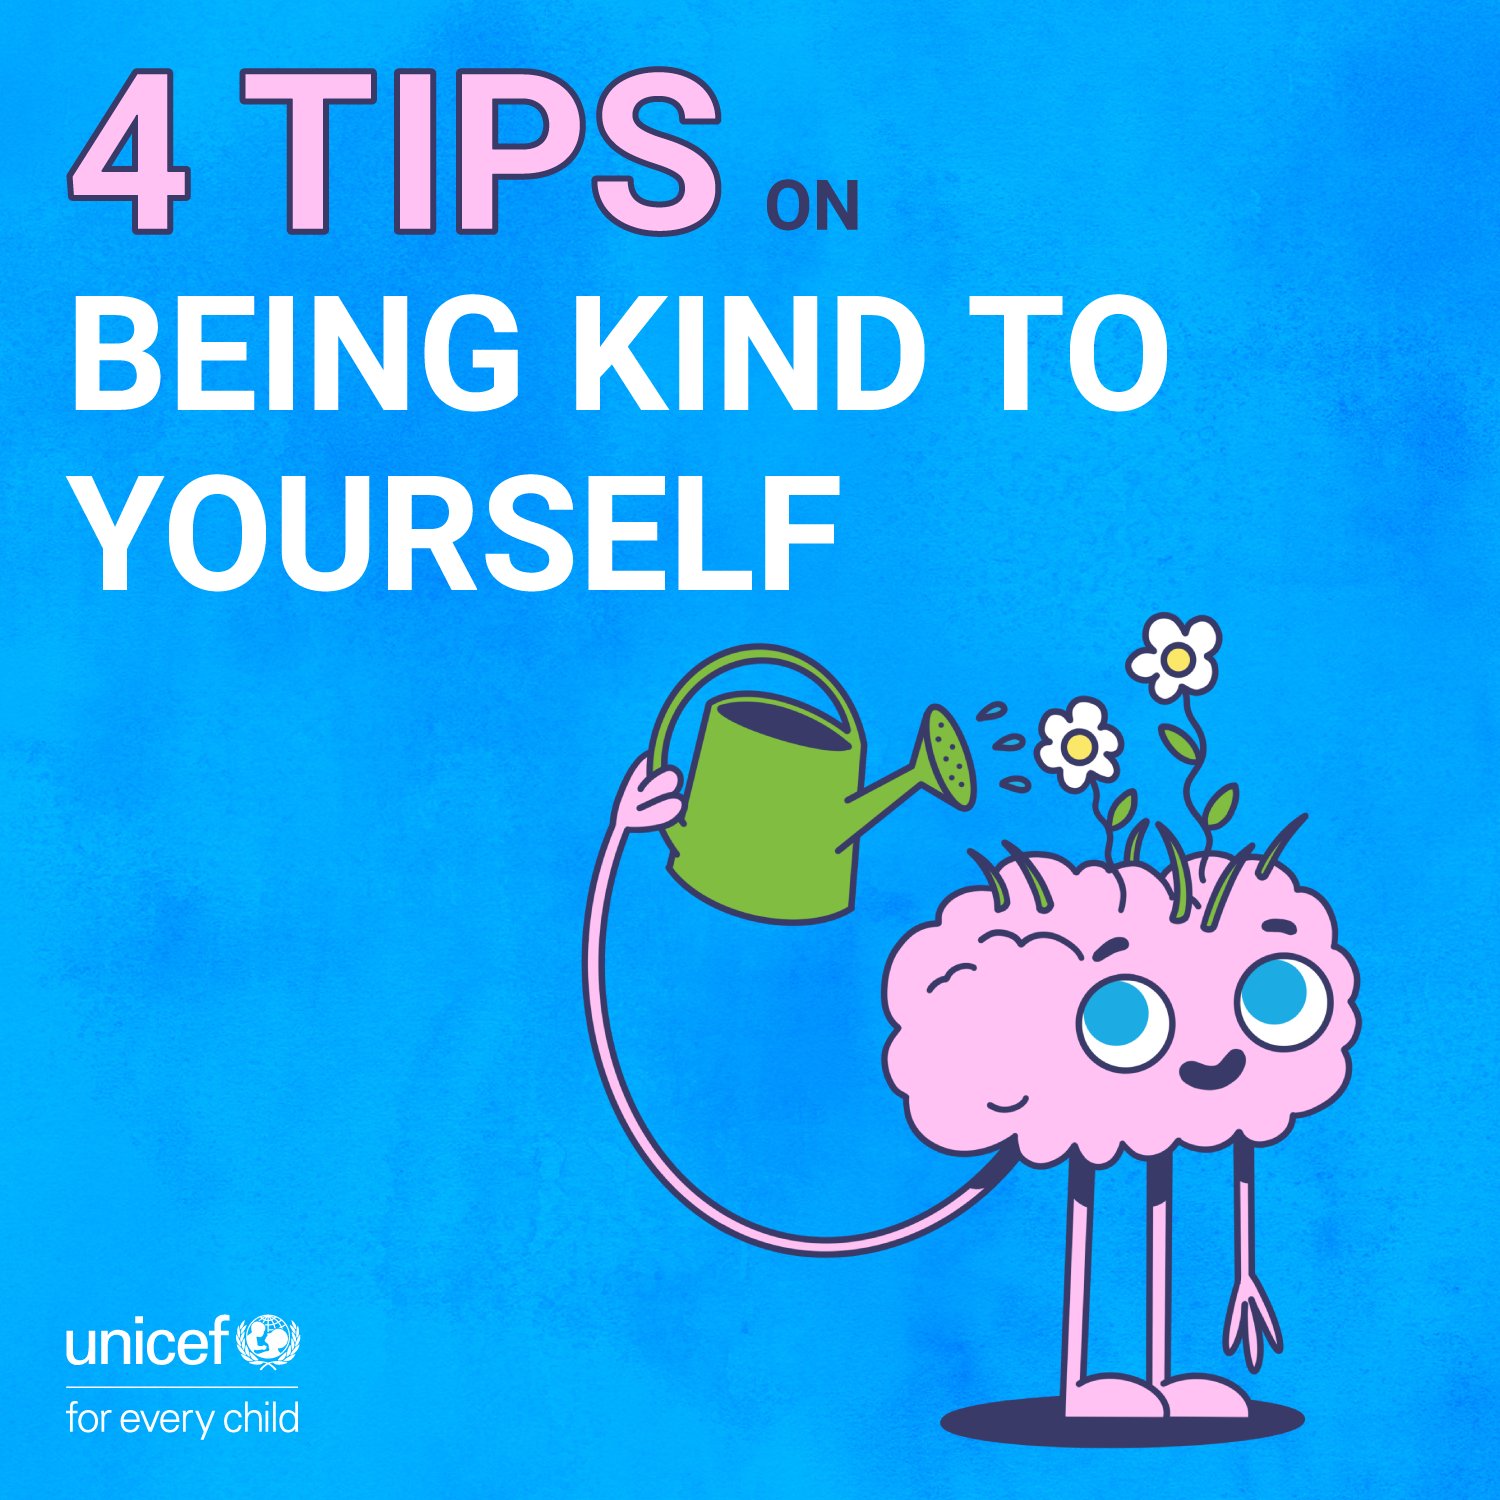 UNICEF on X: Are you being a good friend  to yourself? This